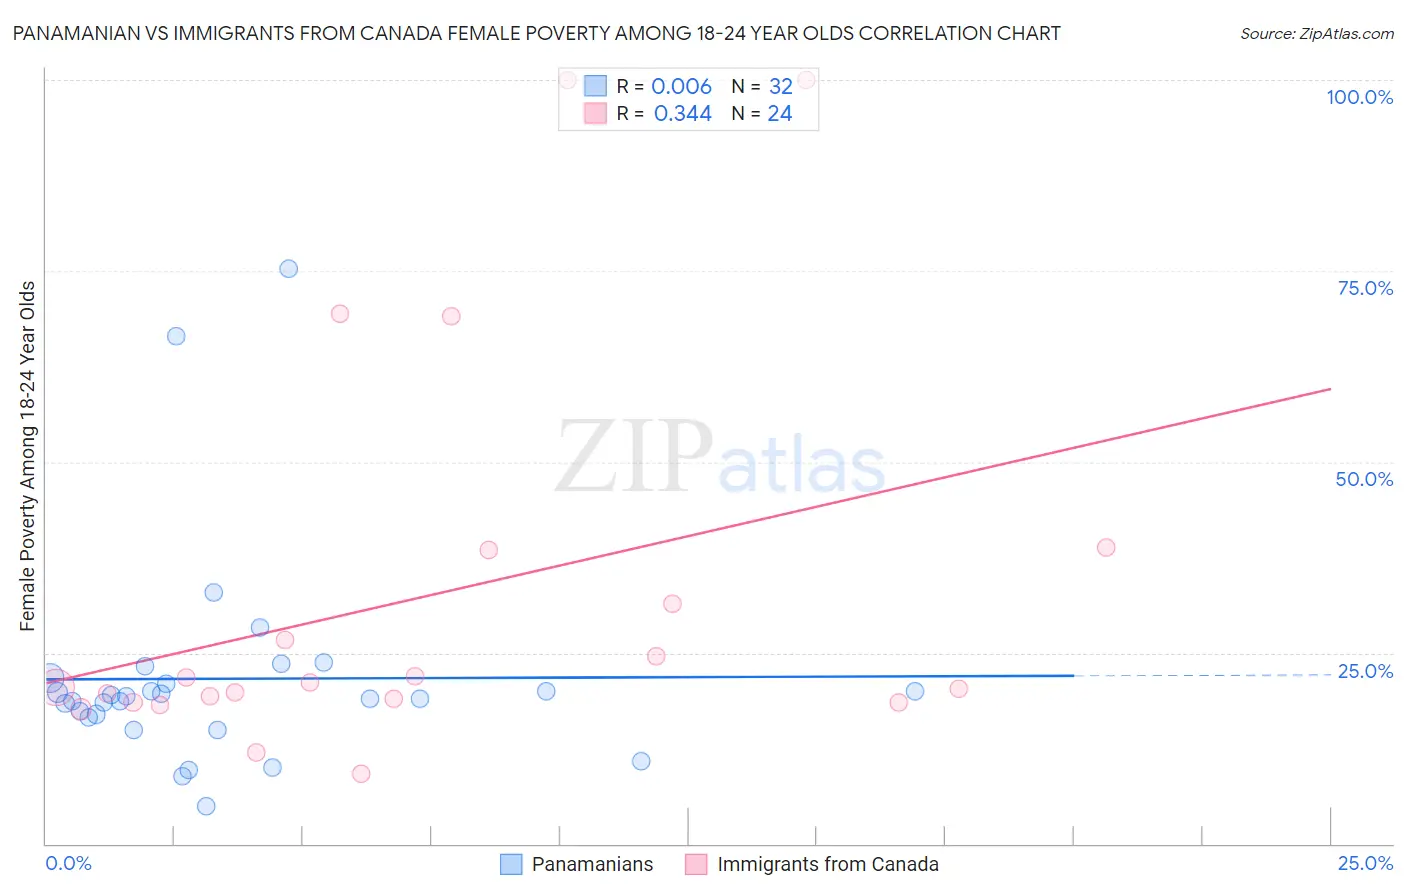 Panamanian vs Immigrants from Canada Female Poverty Among 18-24 Year Olds